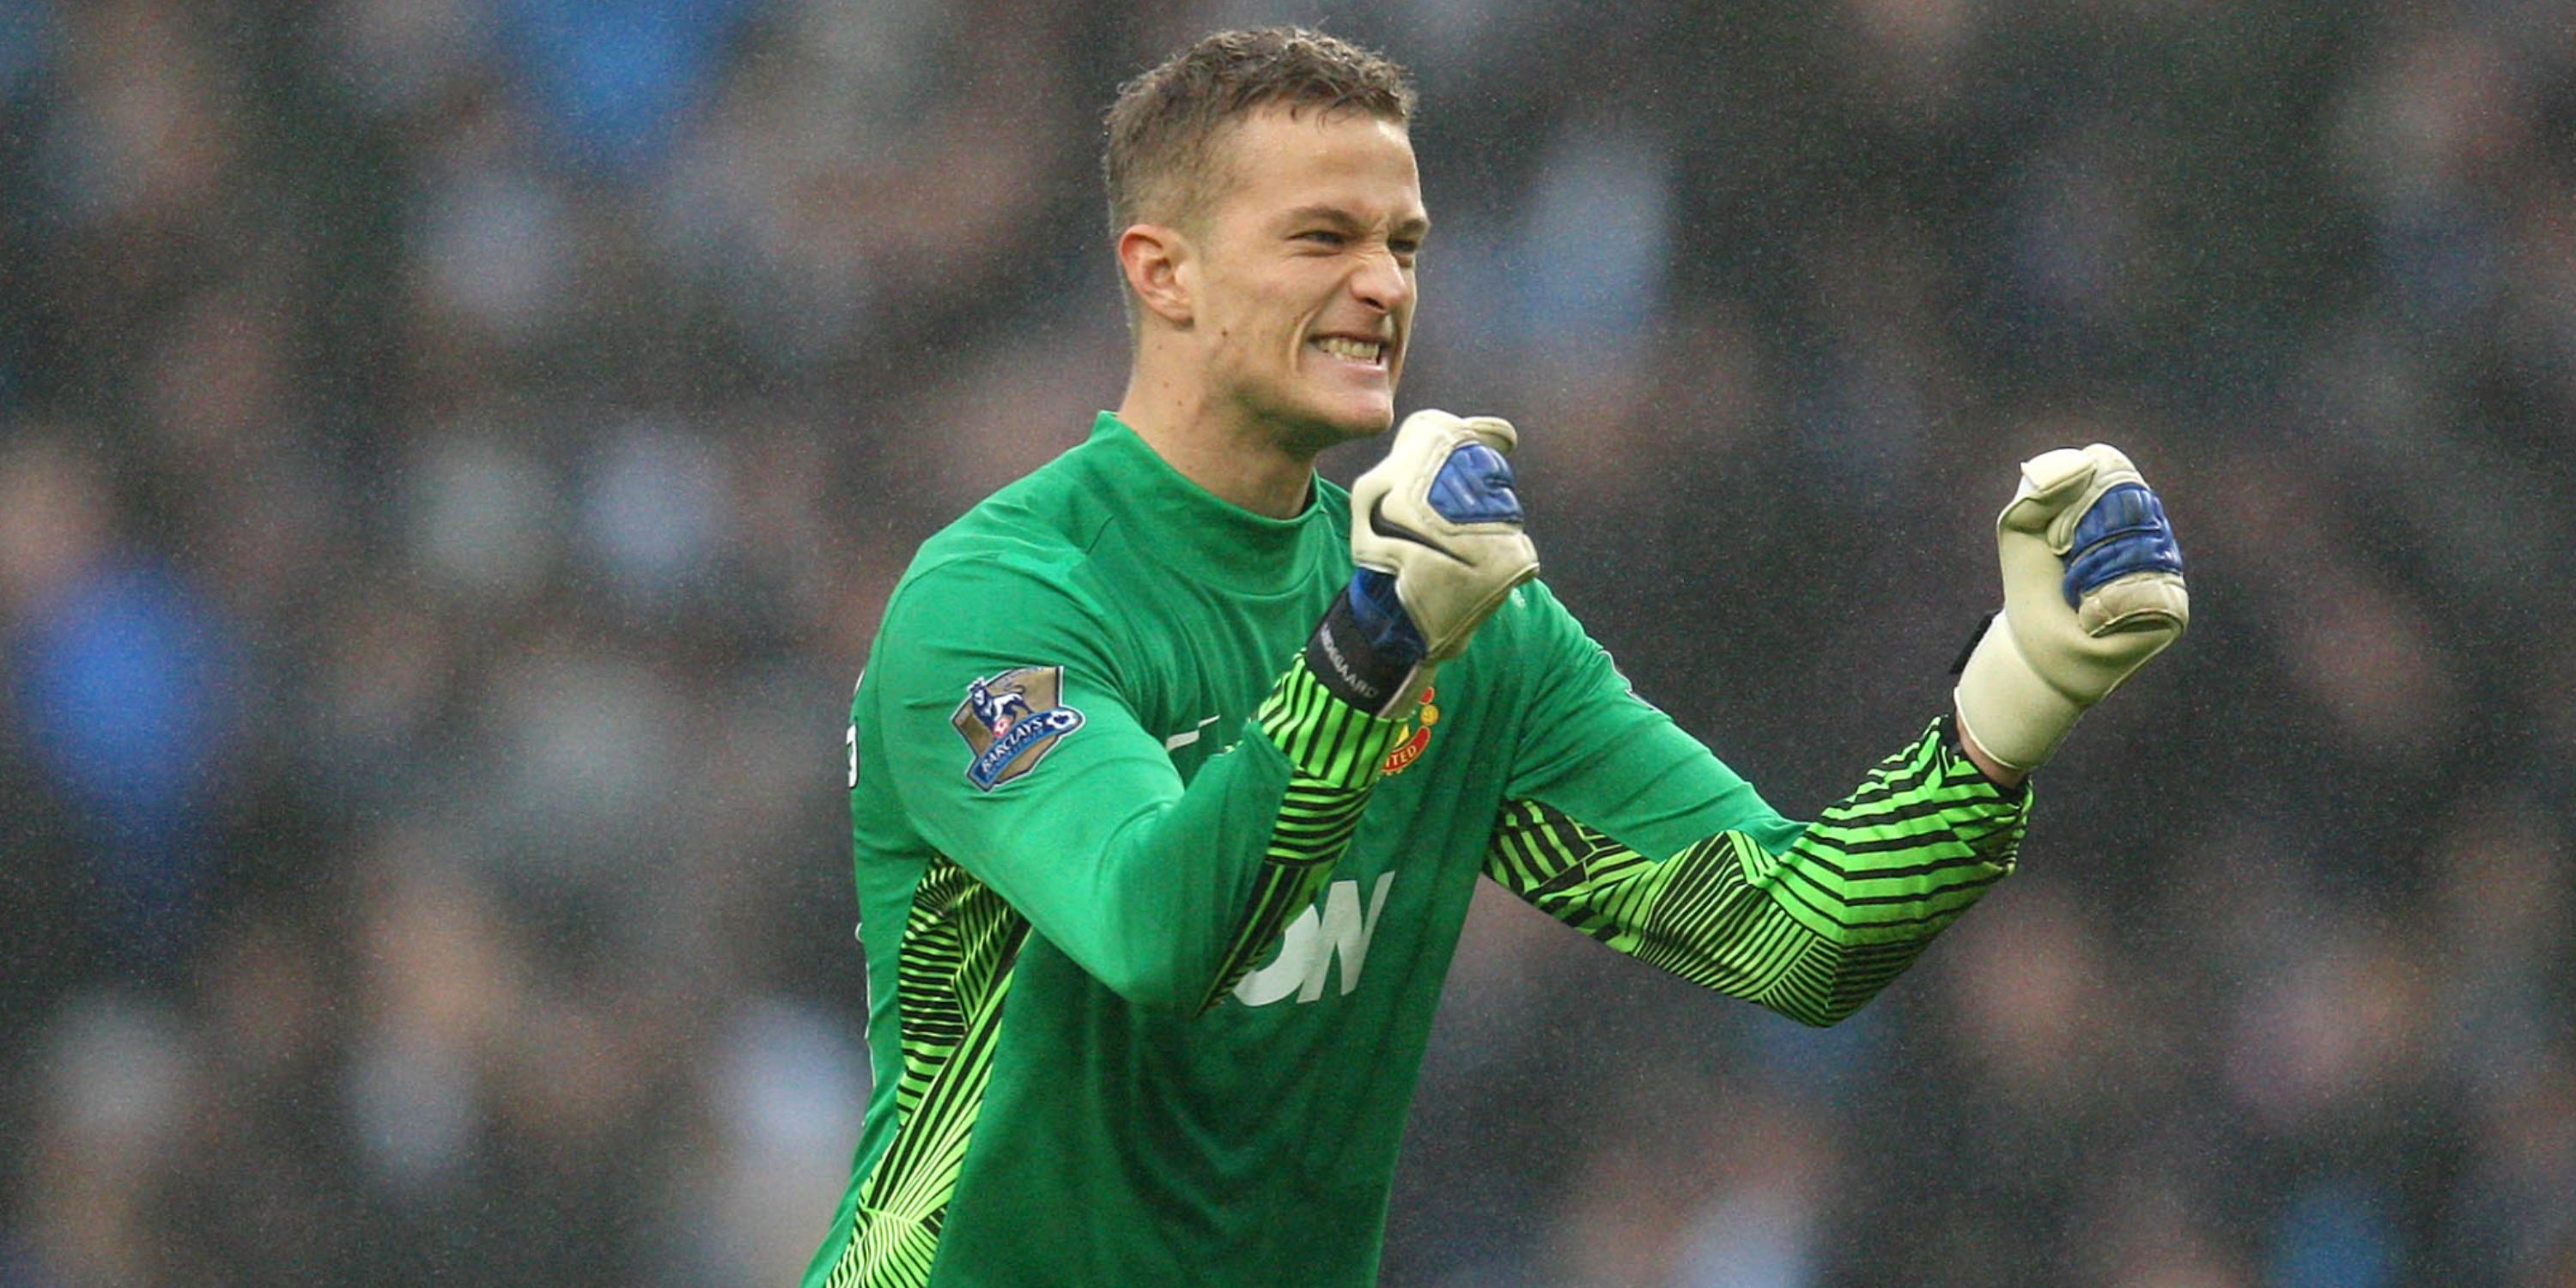 Manchester United's Anders Lindegaard